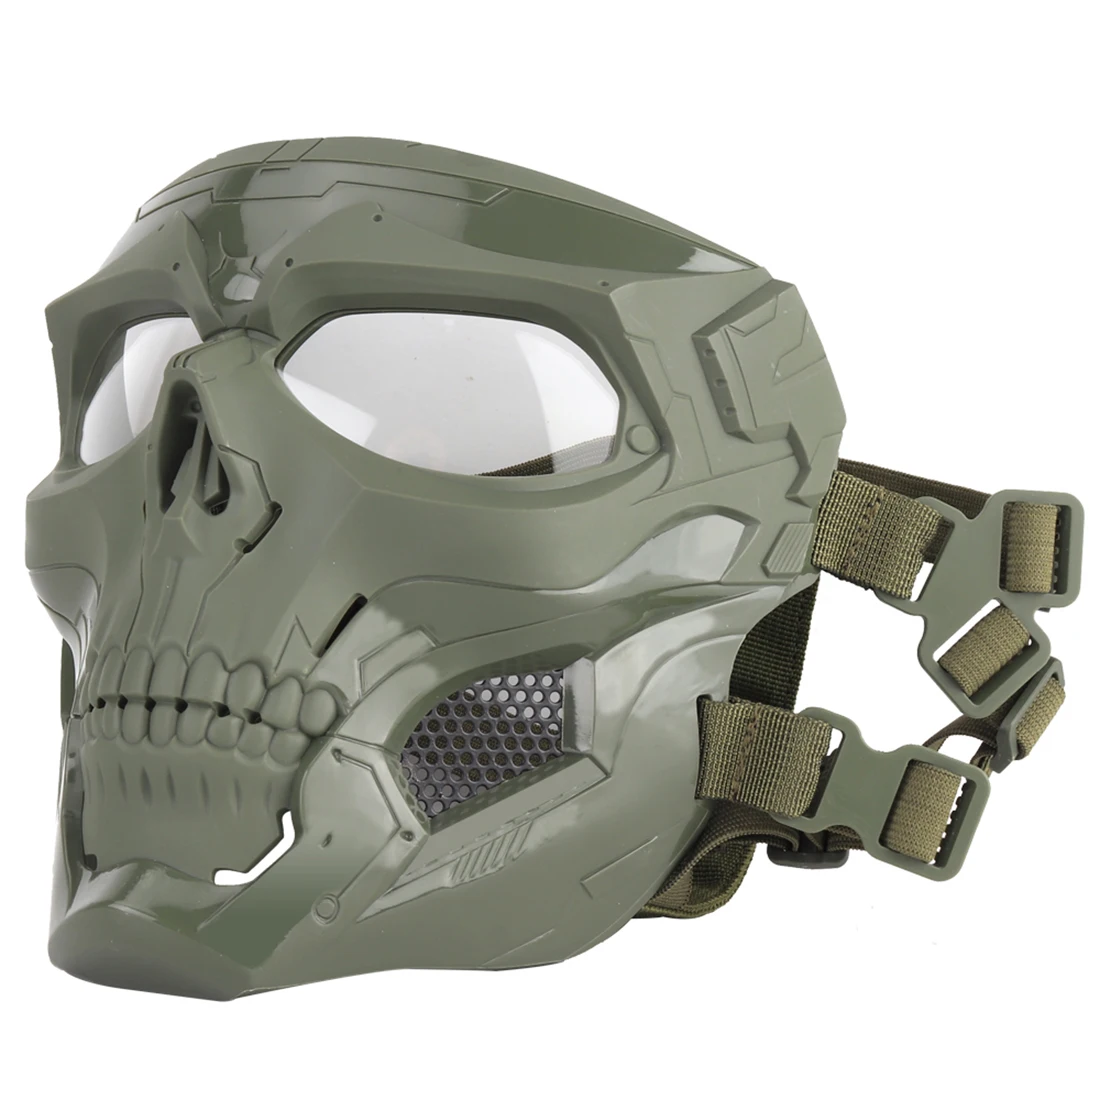 

Surwish WST Skull Tactical Mask Halloween Party Games Face Mask For FAST Outdoors Tactics Accessories - MA-110-OD